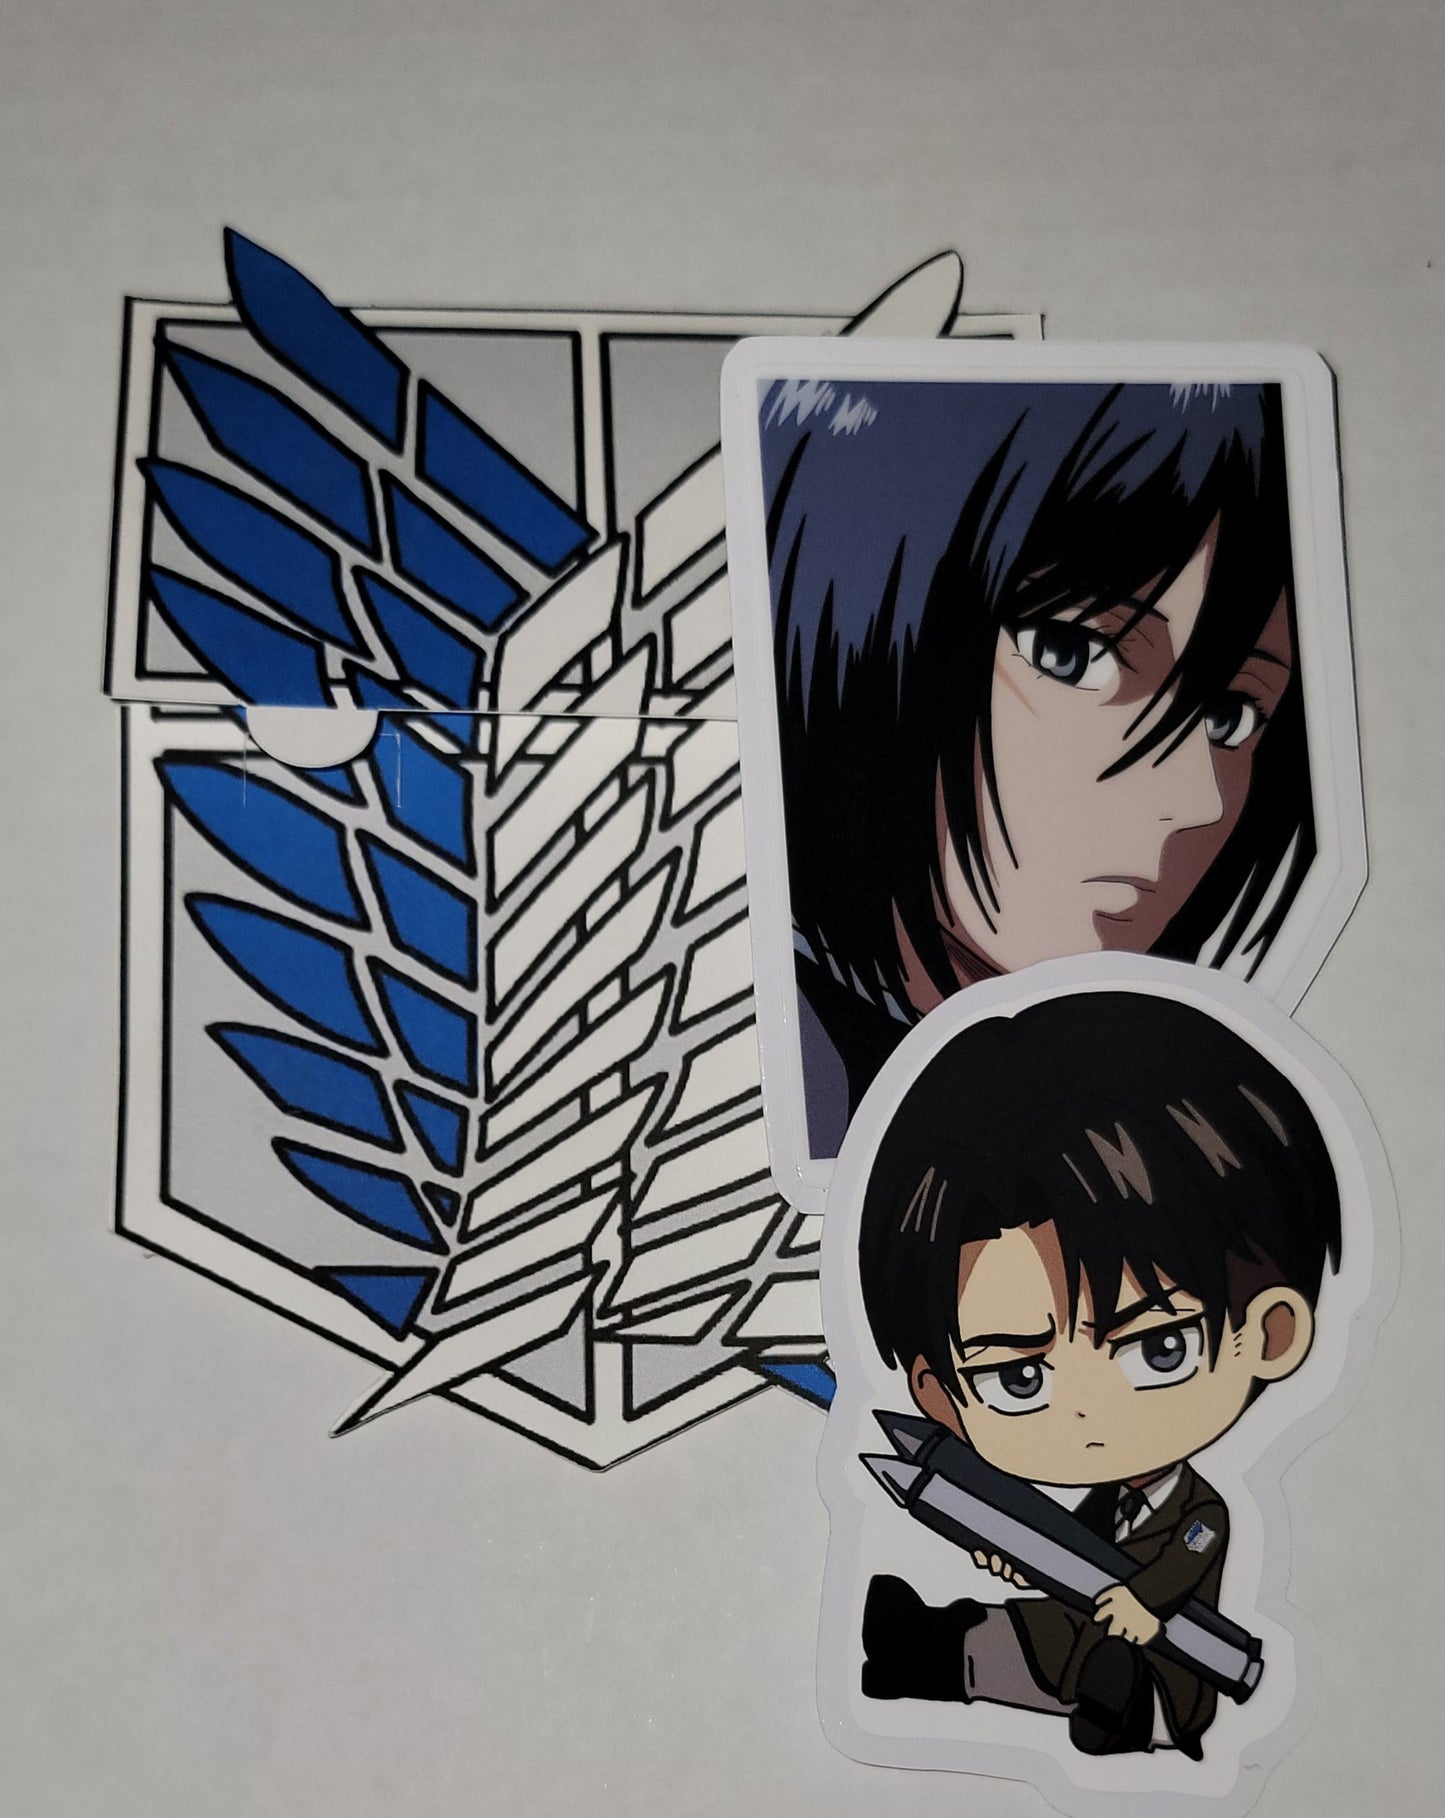 Mystery Attack on Titan (AOT) Sticker Pack